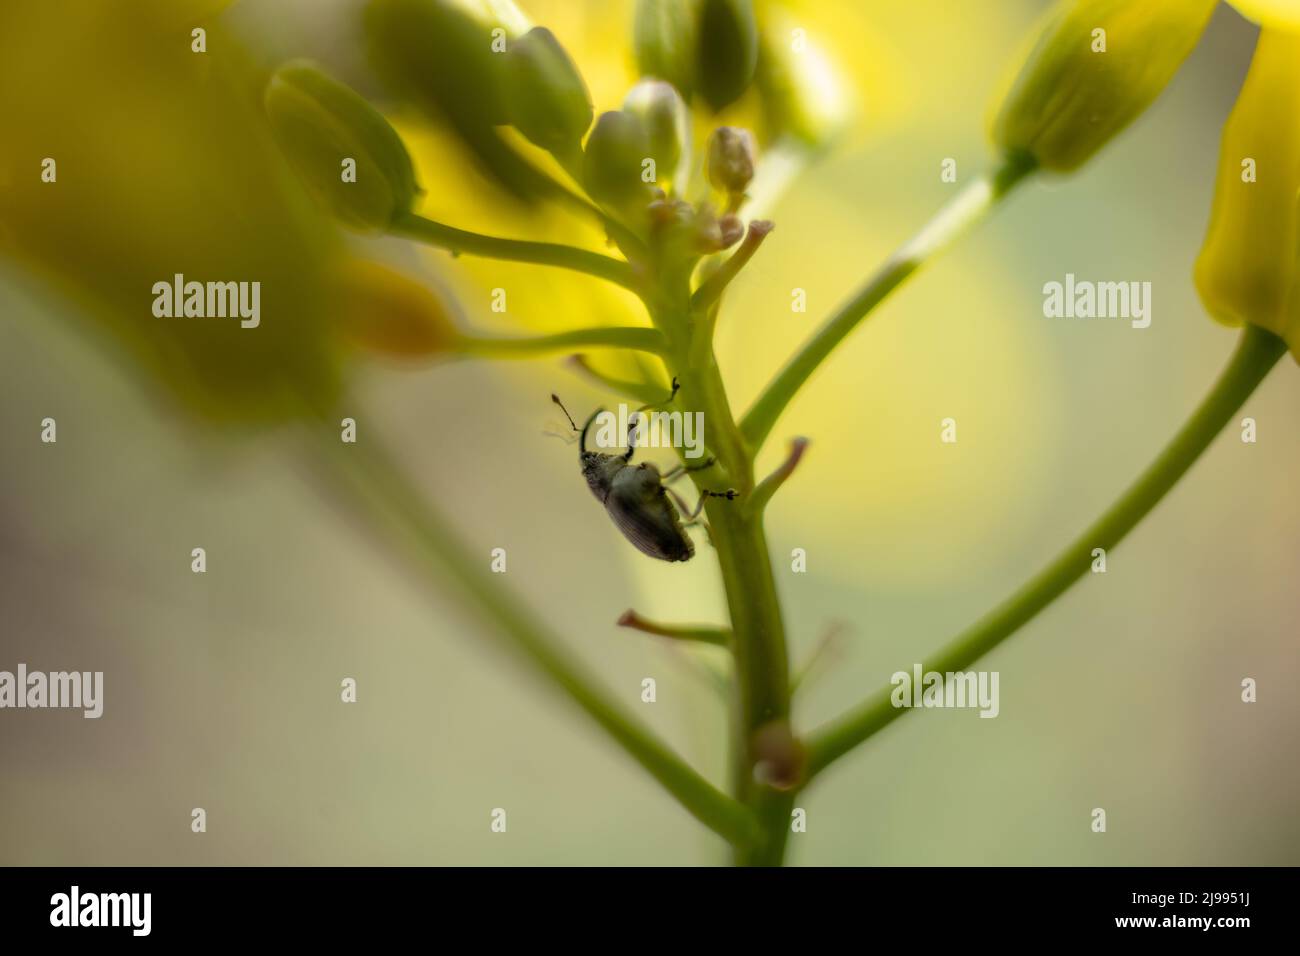 Macro photo of an ant. An ant crawls on a dandelion. Macro photo of insects. Stock Photo